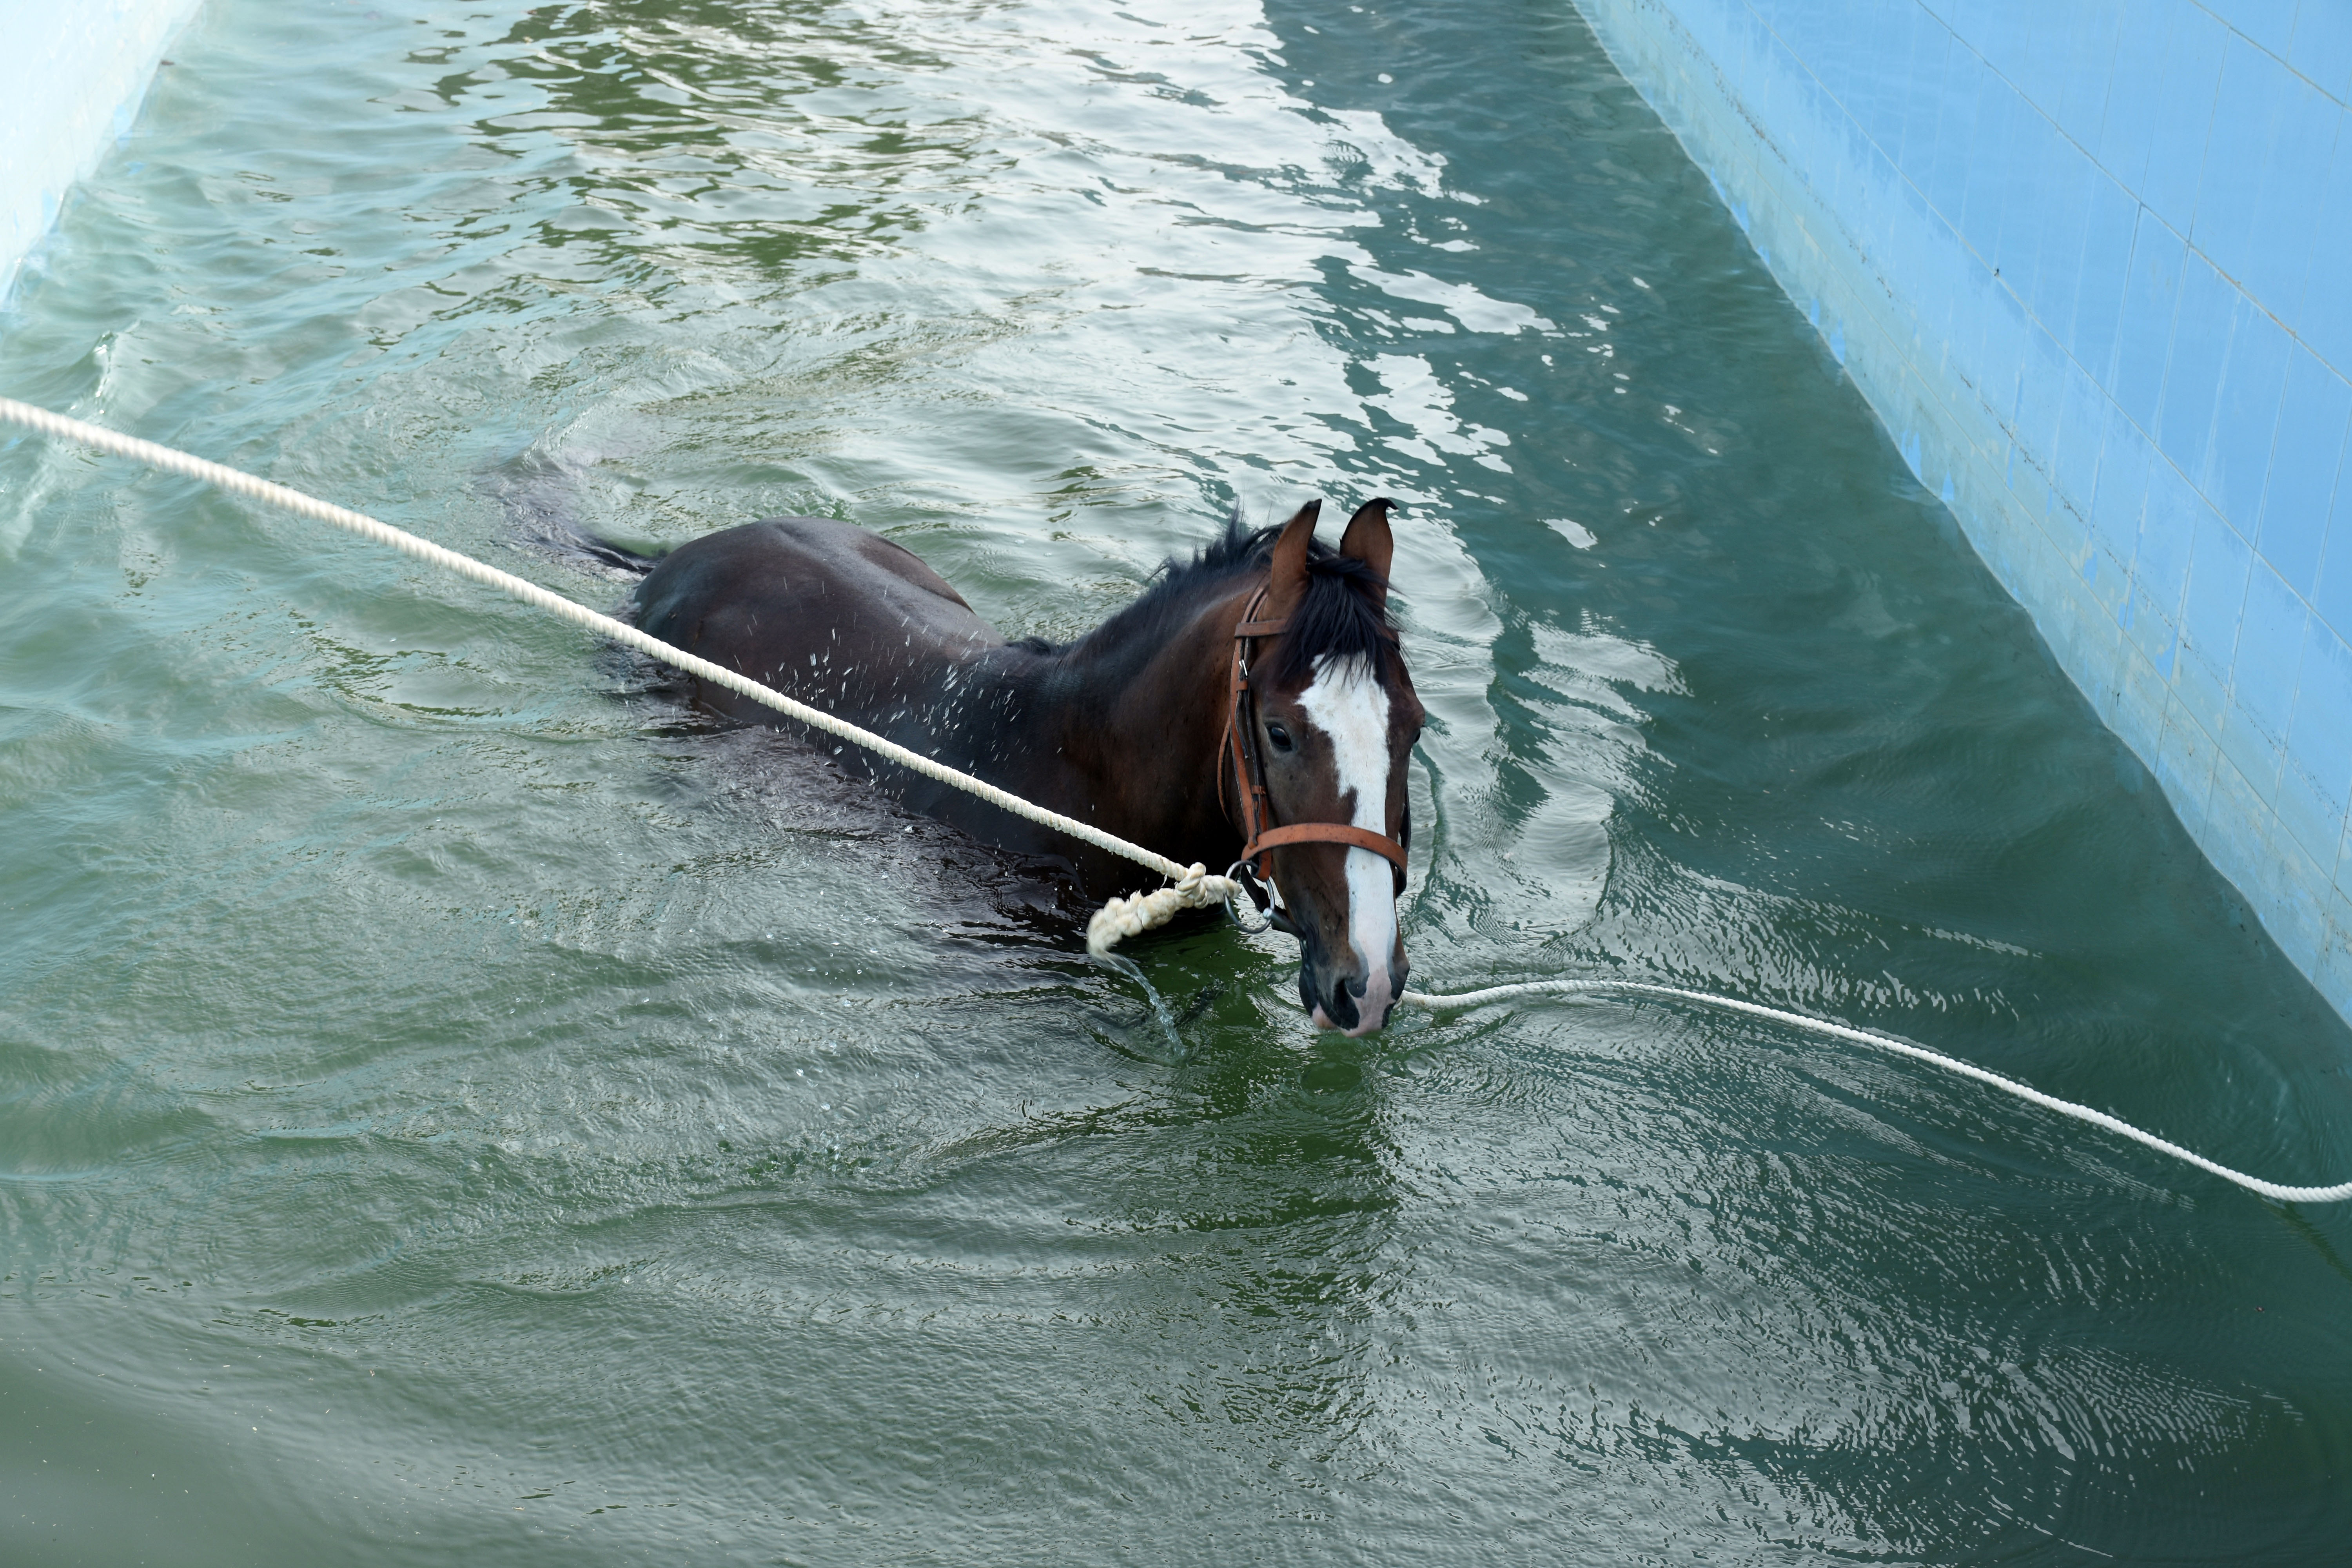 The horses 'rushed' in the water for health